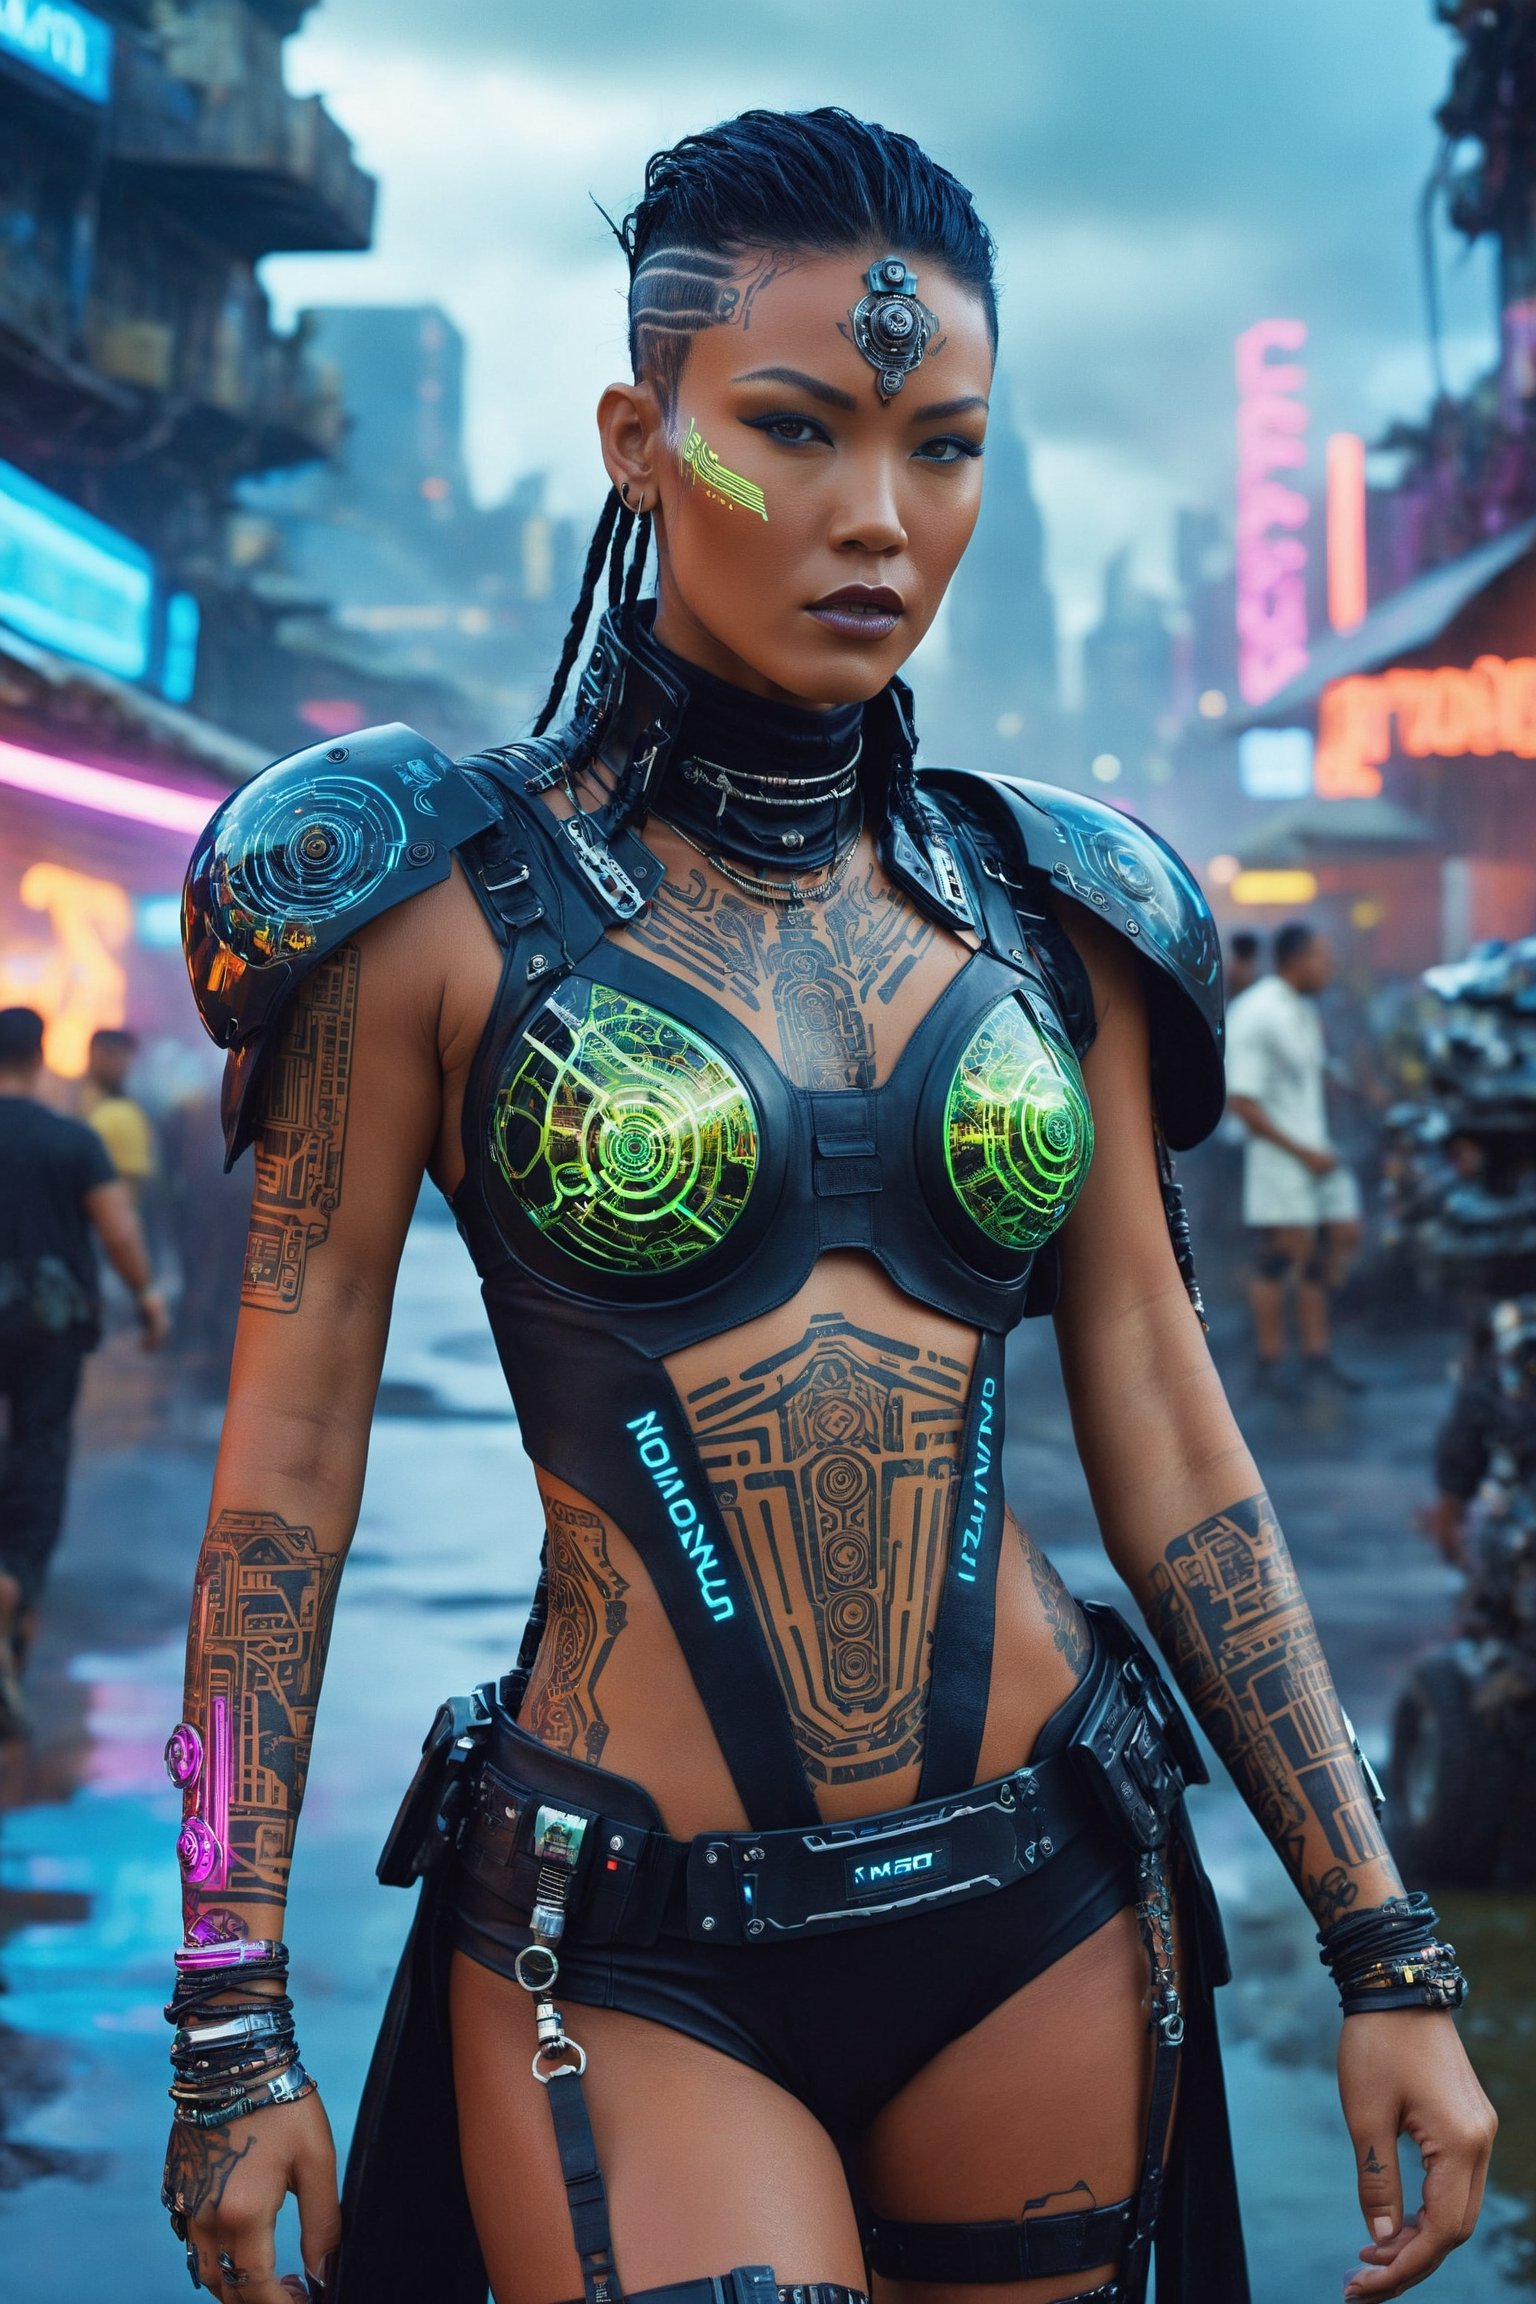 ((((Upper body photograph)))) Generate a very realistic Photograph of an insanely beautiful Mahina, The Technomancer:Mahina possesses a fierce beauty with piercing cybernetic eyes that radiate a neon glow. Her face is adorned with intricate, circuit-like patterns, blending the ancient and futuristic. Neon tattoos trace along her body, pulsing with energy. She wears a cyberpunk-inspired outfit, a fusion of high-tech materials and traditional Tahitian elements. The setting is a sprawling cyberpunk cityscape intertwined with lush Tahitian landscapes. Art and scenario by Yoji Shinkawa. Costume by Alexander McQueen. CGI effects by Double Negative. Photograph by Mert Alas and Marcus Piggott, Taken with a 50mm f/1.8 lens, f/2.2 aperture, shutter speed 1/200s, ISO 100 and natural light, Hyper Realistic Photography process, Cinematic, Cinema, Hyperdetailed. UHD, Color Correction, hdr, color grading, hyper realistic CG animation,Monster,cyborg style